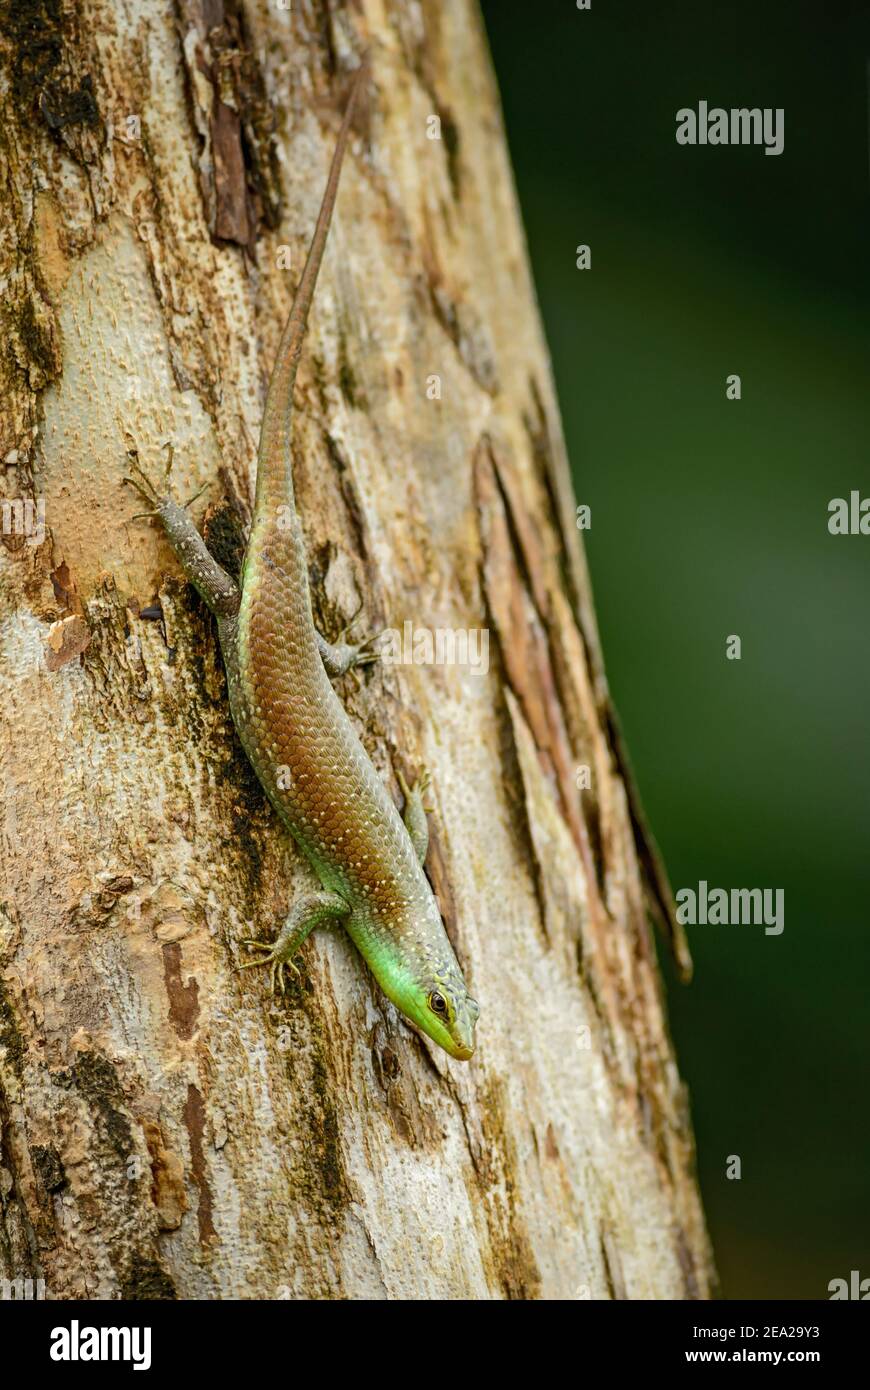 Olive Tree Skink – Dasia olivacea, shy lizard from Southest Asian forests and woodlands, Thailand. Stock Photo